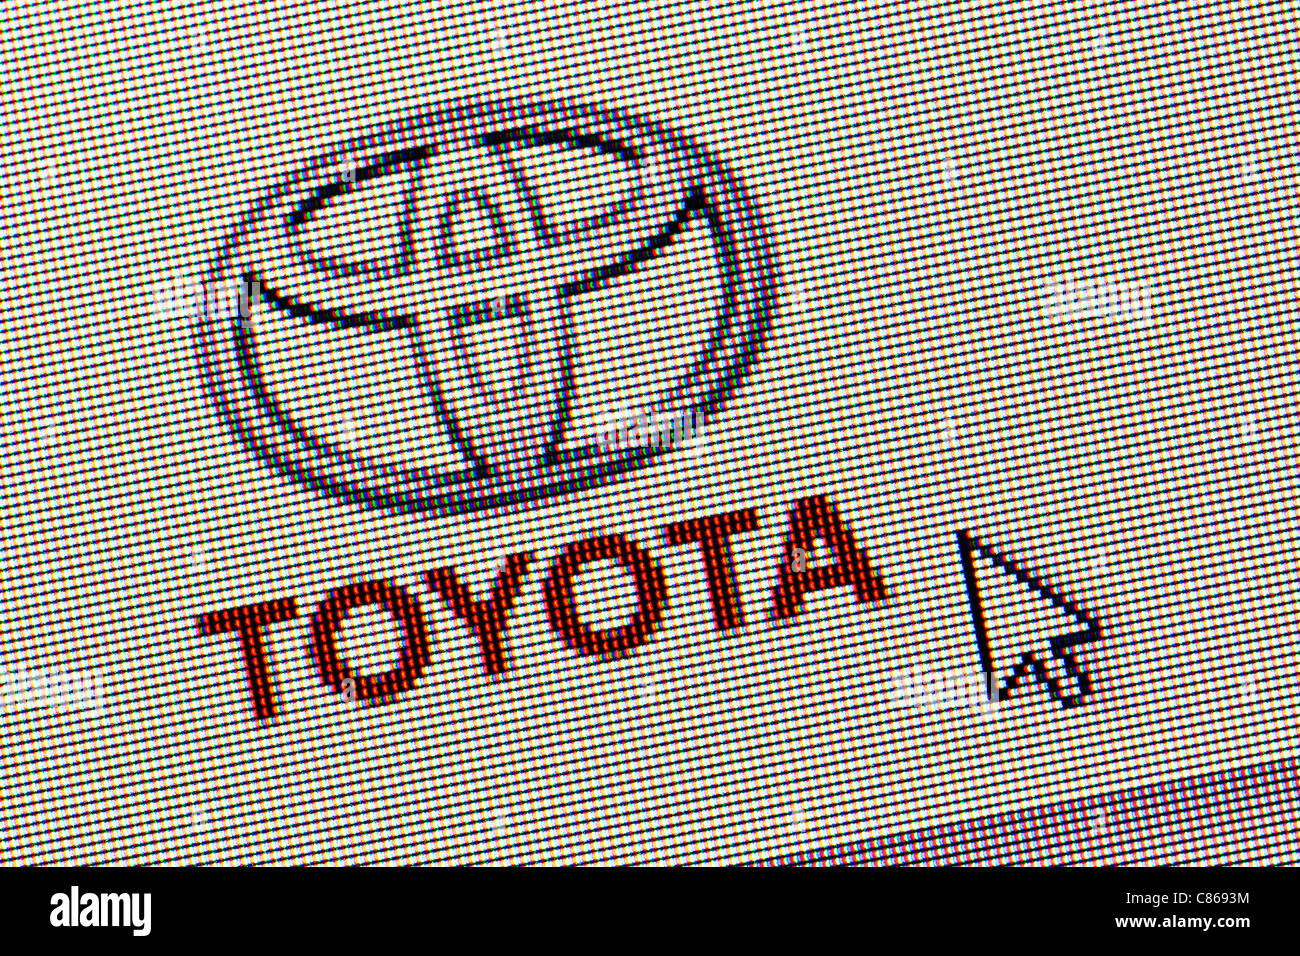 Toyota logo and website close up Stock Photo